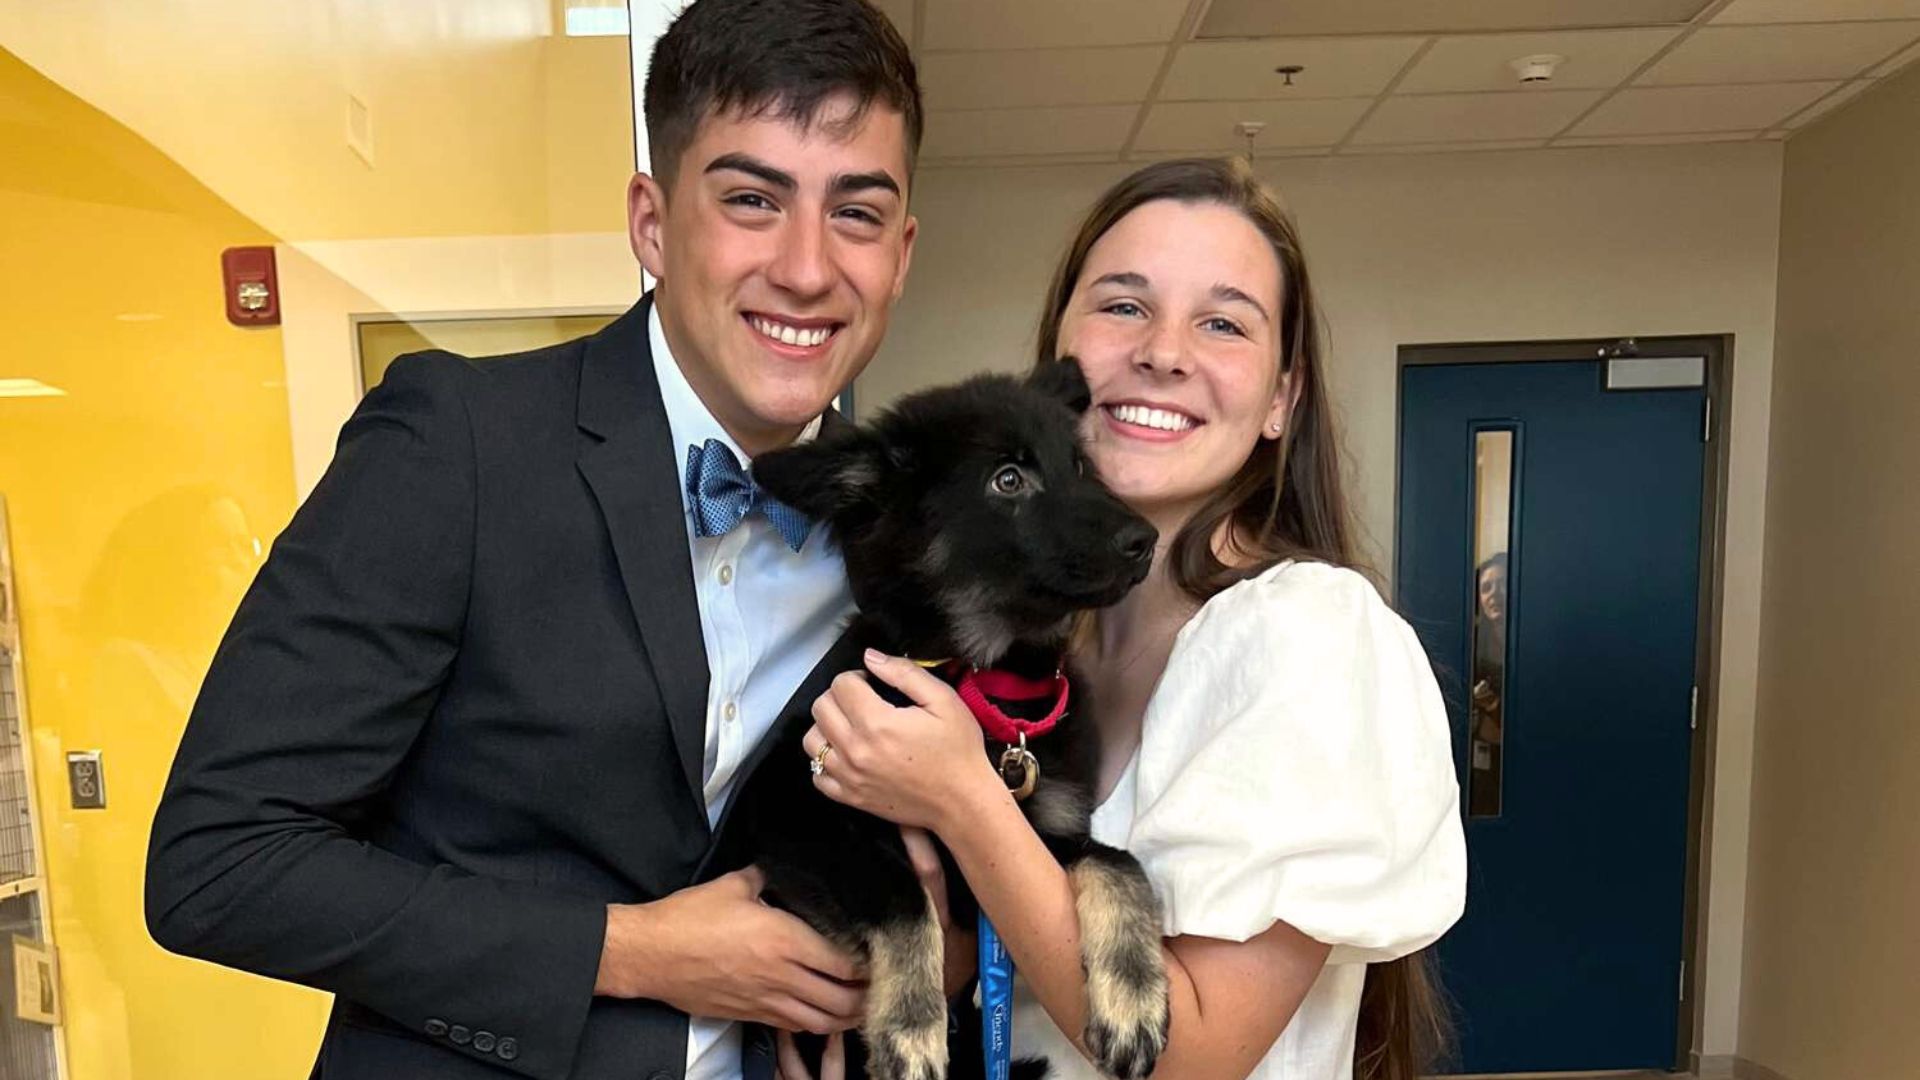 Marine Couple Reschedules Their Wedding To Adopt A Dog They Wanted So Much